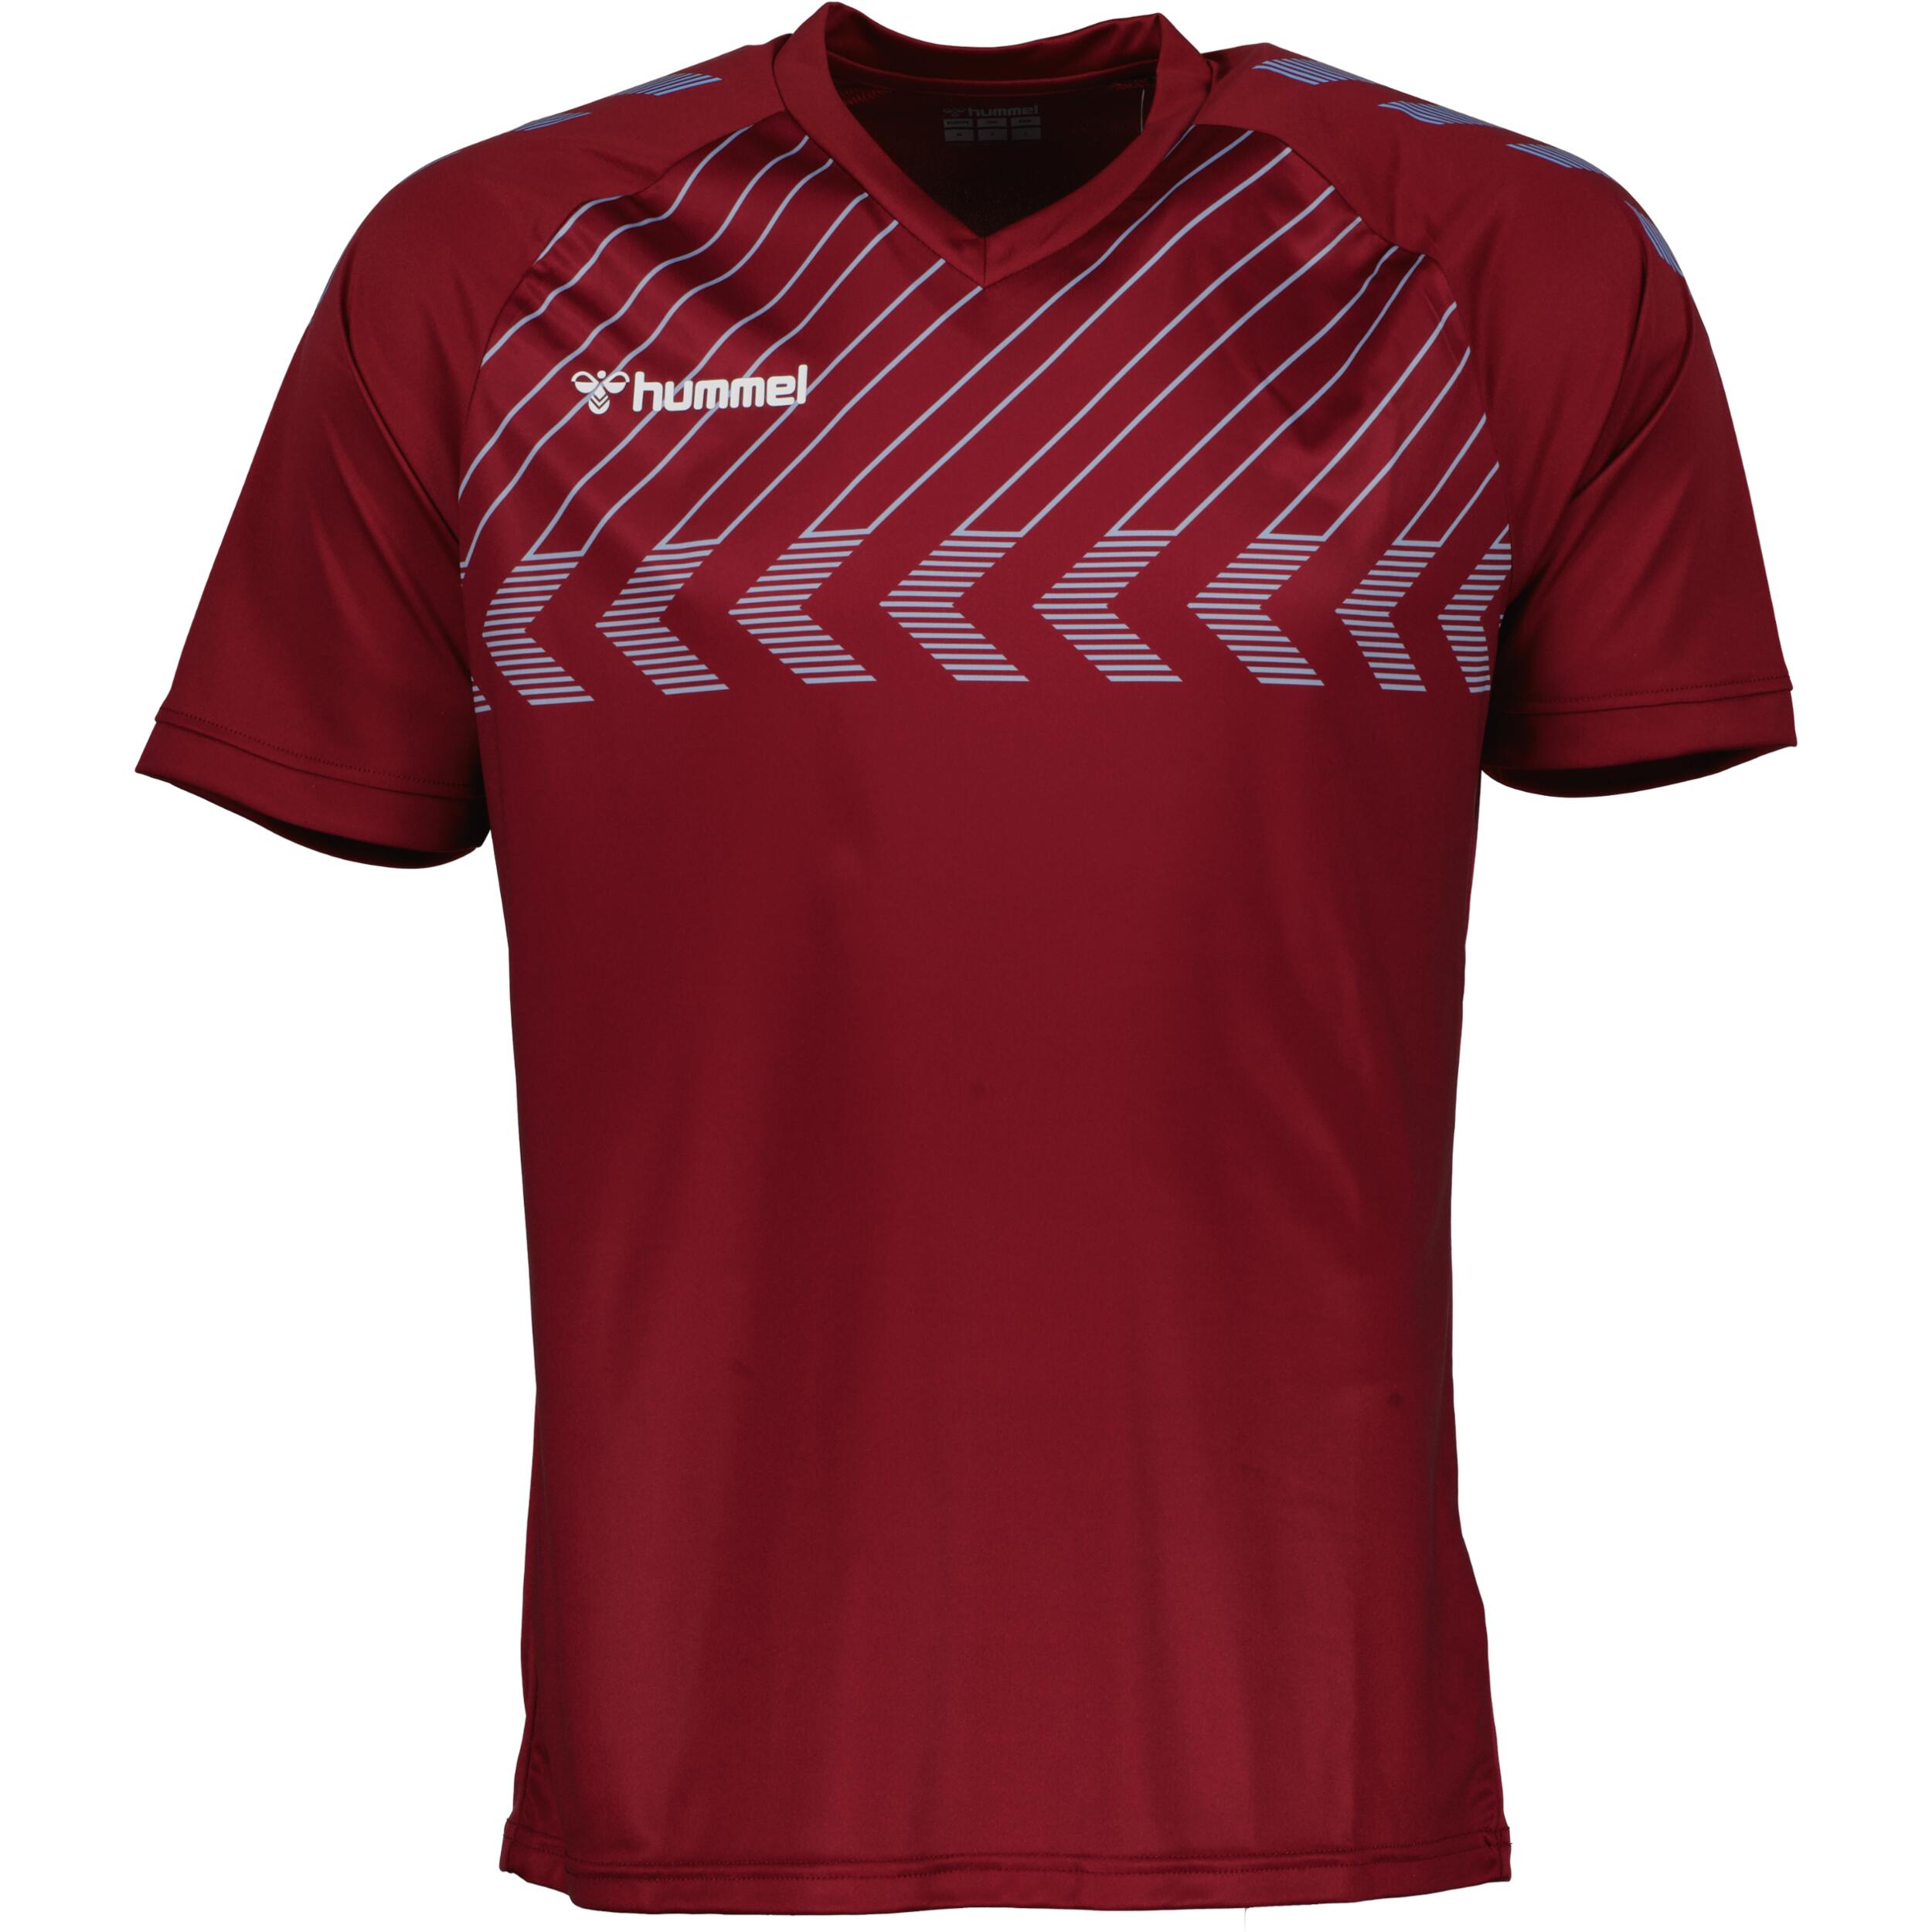 Poly jersey for men, great for football, in maroon 1/3